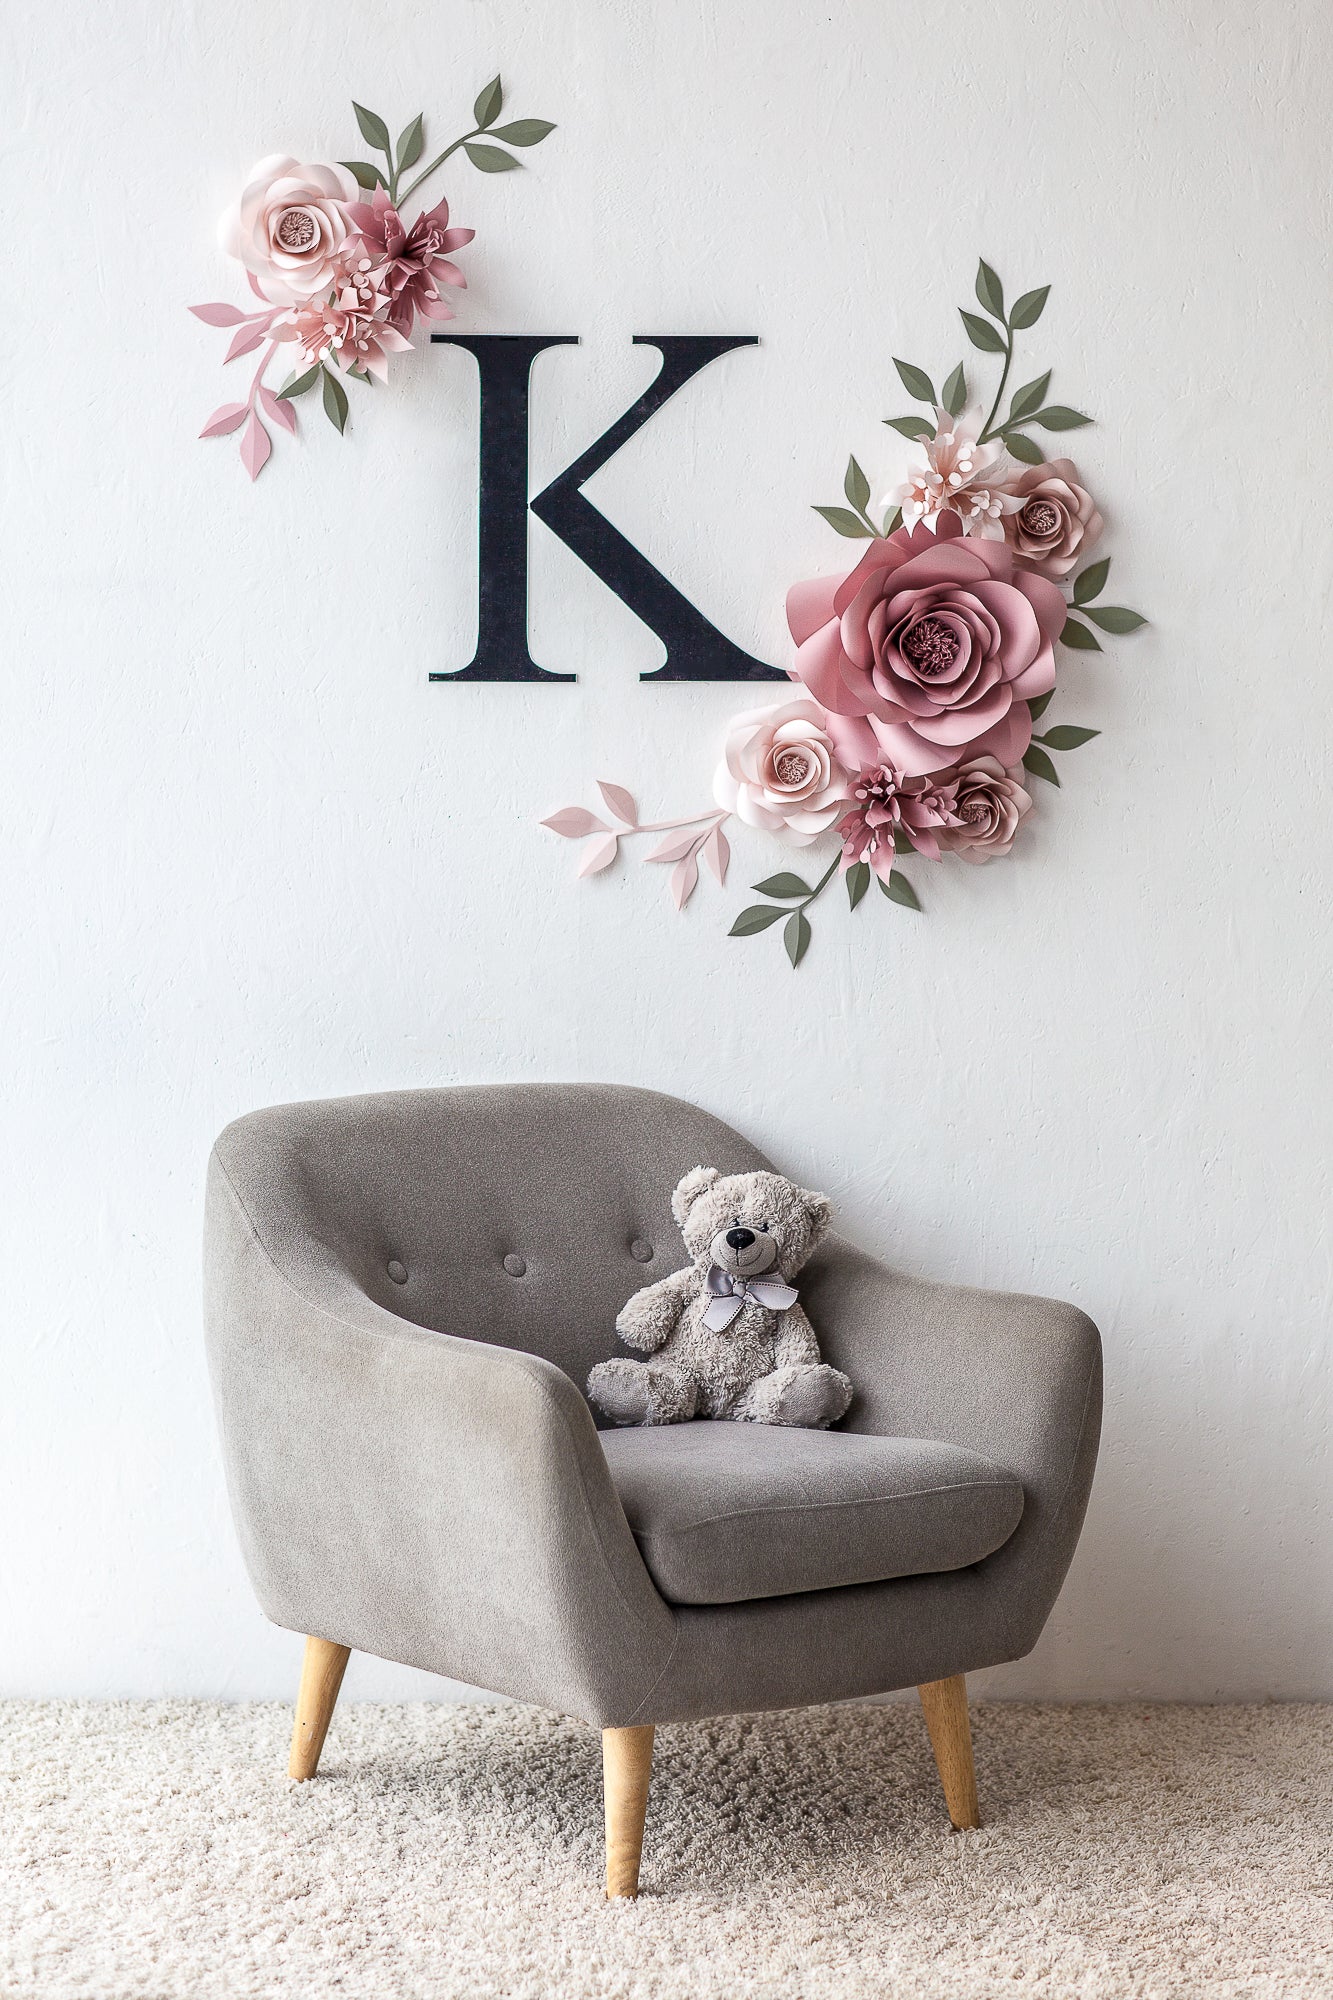 Whimsical Nursery Decor: Blush Nude and Misty Rose Wallpaper Flowers